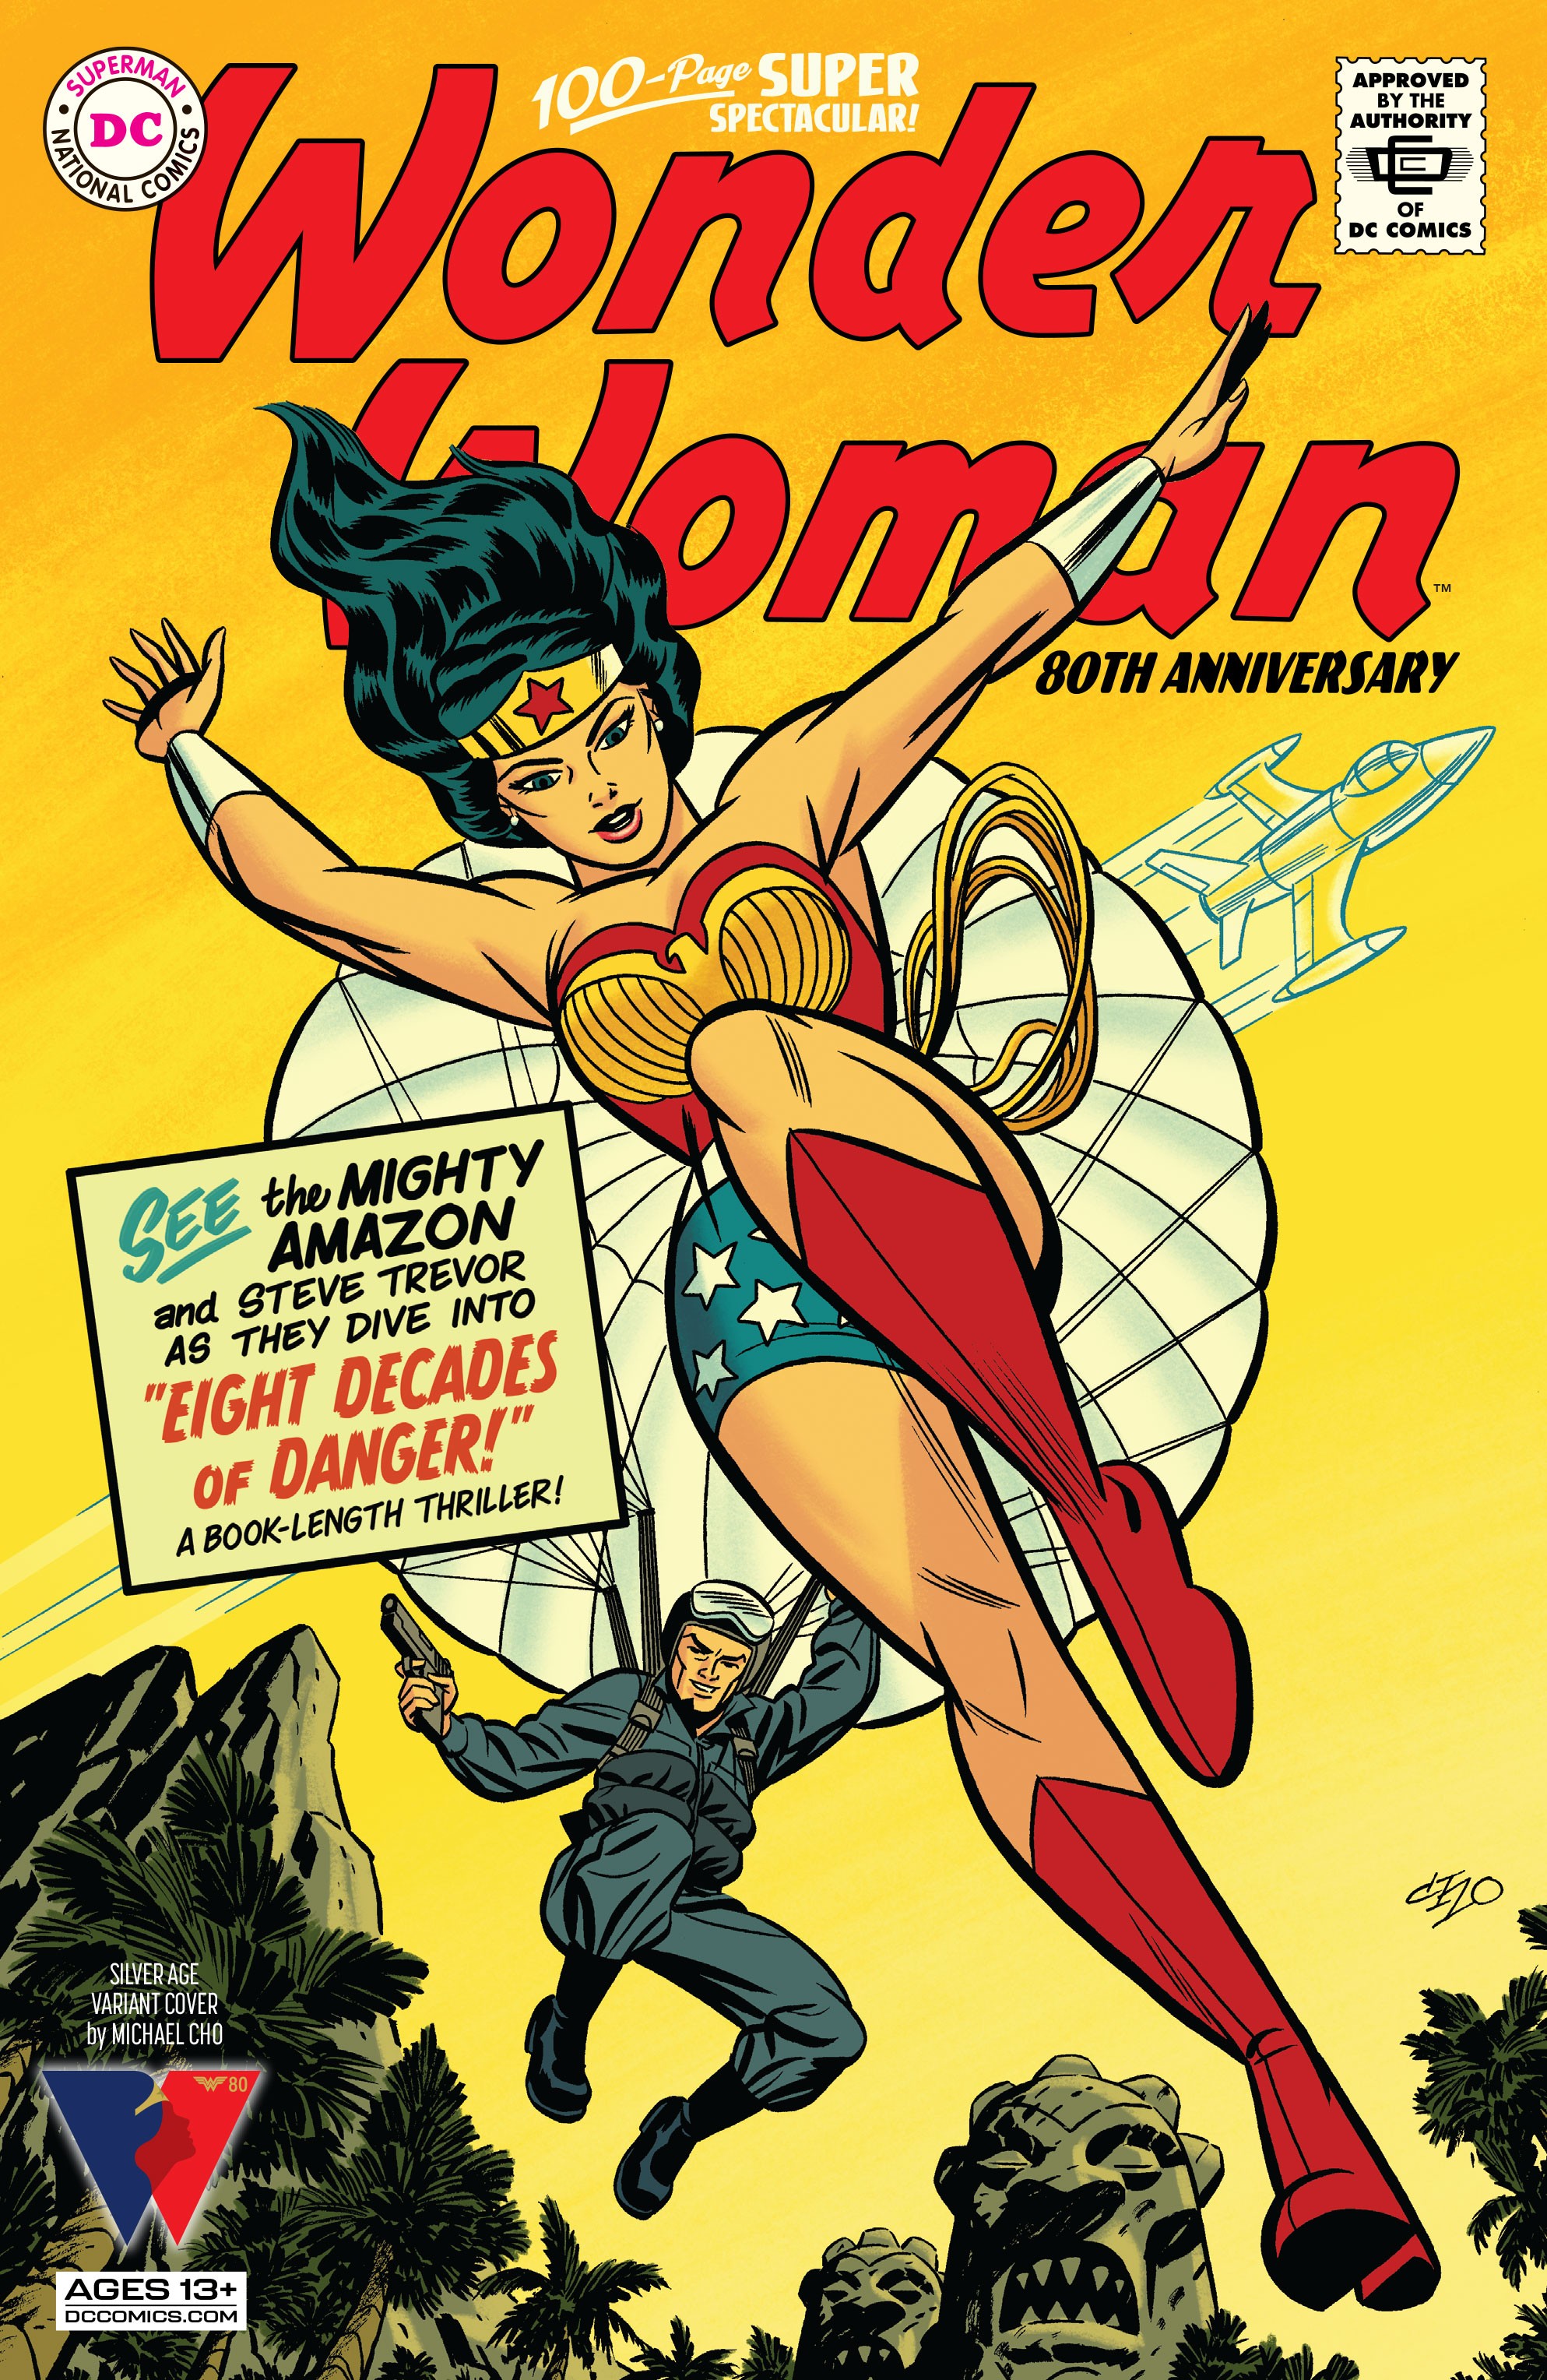 0821DC060 WONDER WOMAN 80TH ANNIVERSARY 100-PAGE SUPER SPECTACULAR #1 VARIANT 